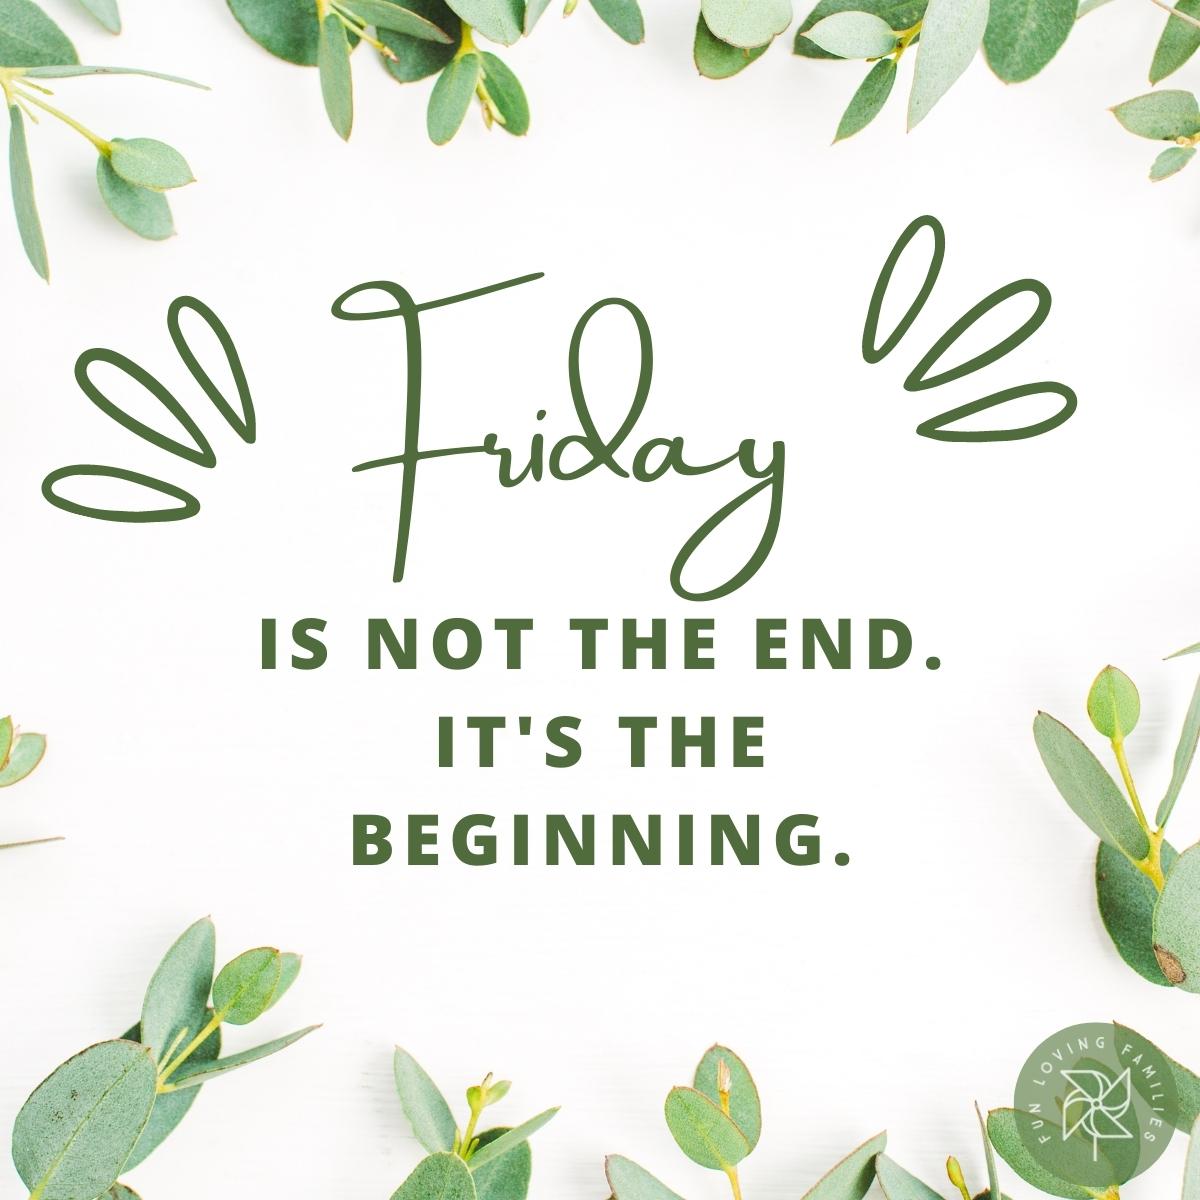 Friday is not the end; it is the beginning affirmation